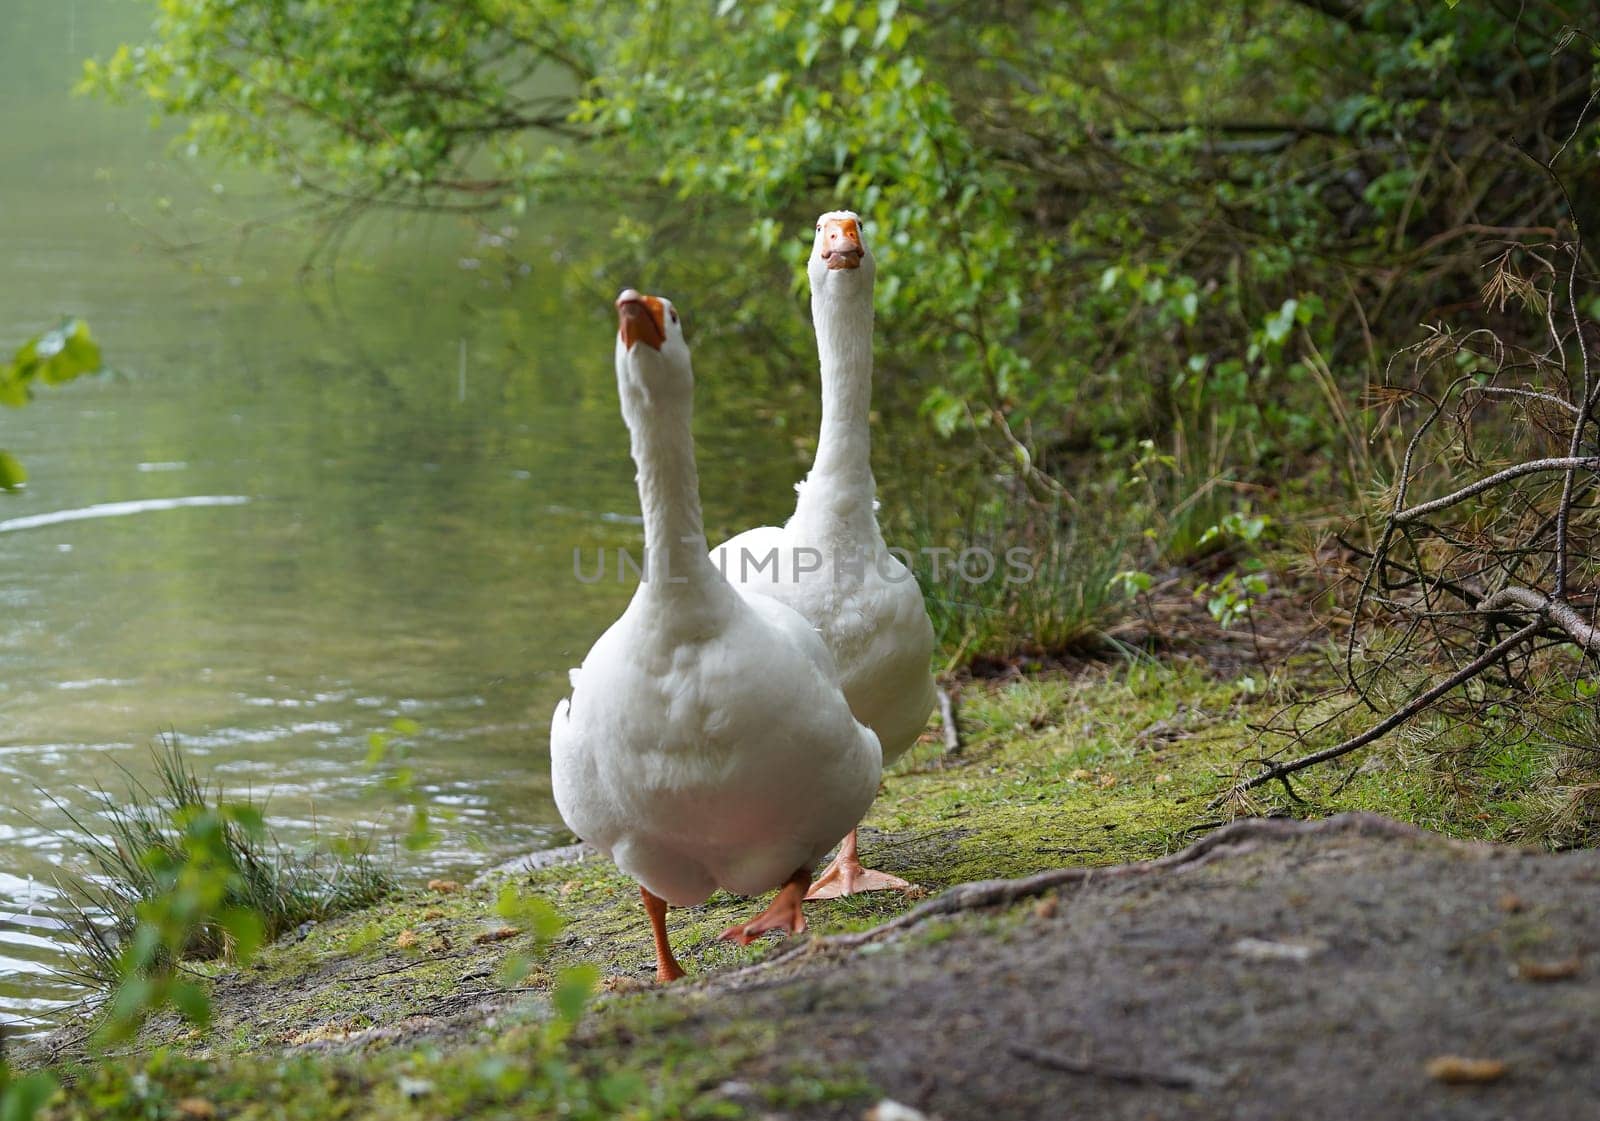 Two irritated Emden geese getting out of the water. This photographer should leave!